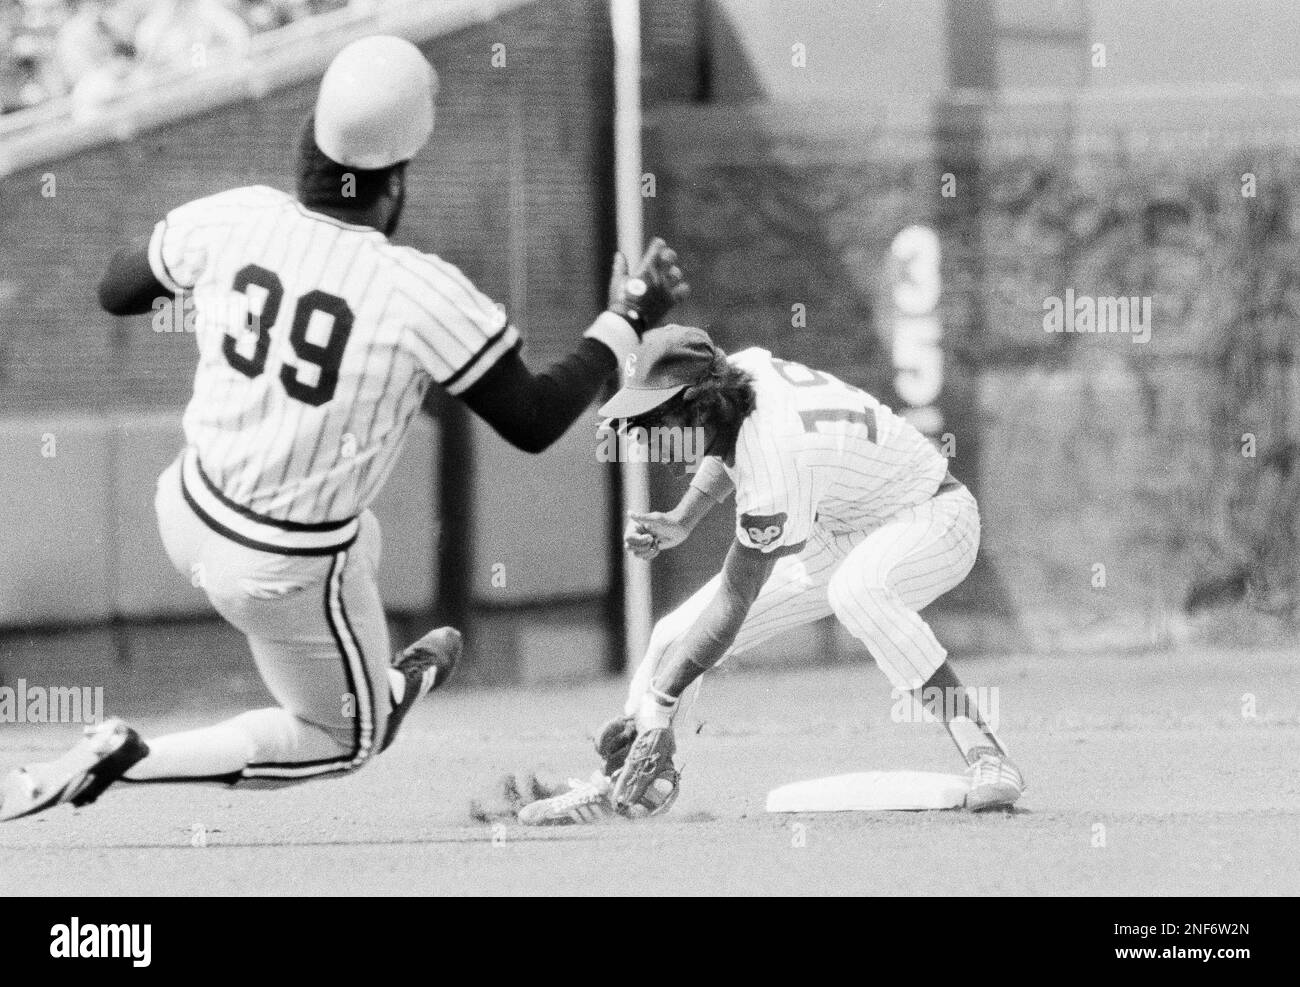 Pittsburgh Pirates' Dave Parker (39) starts slide into second as